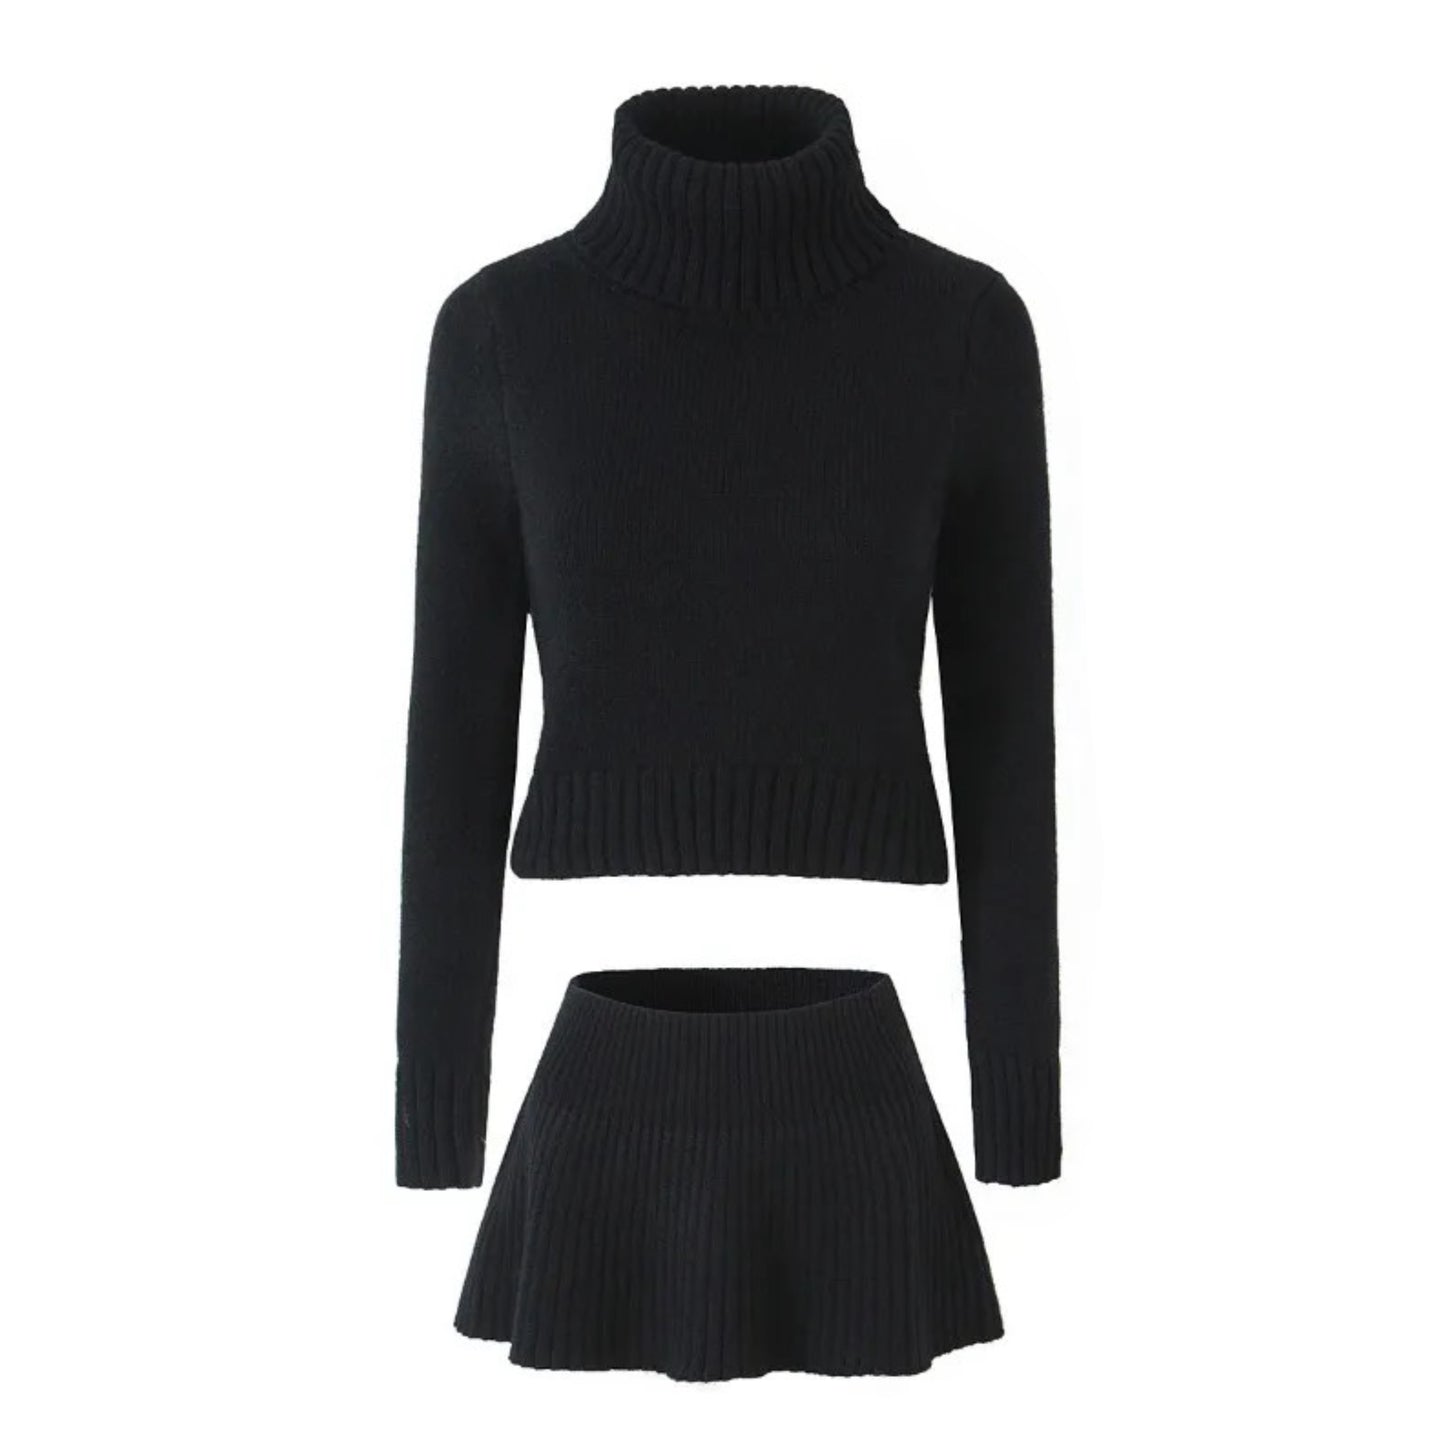 Black Knit Fitted Sweater & Skirt Set